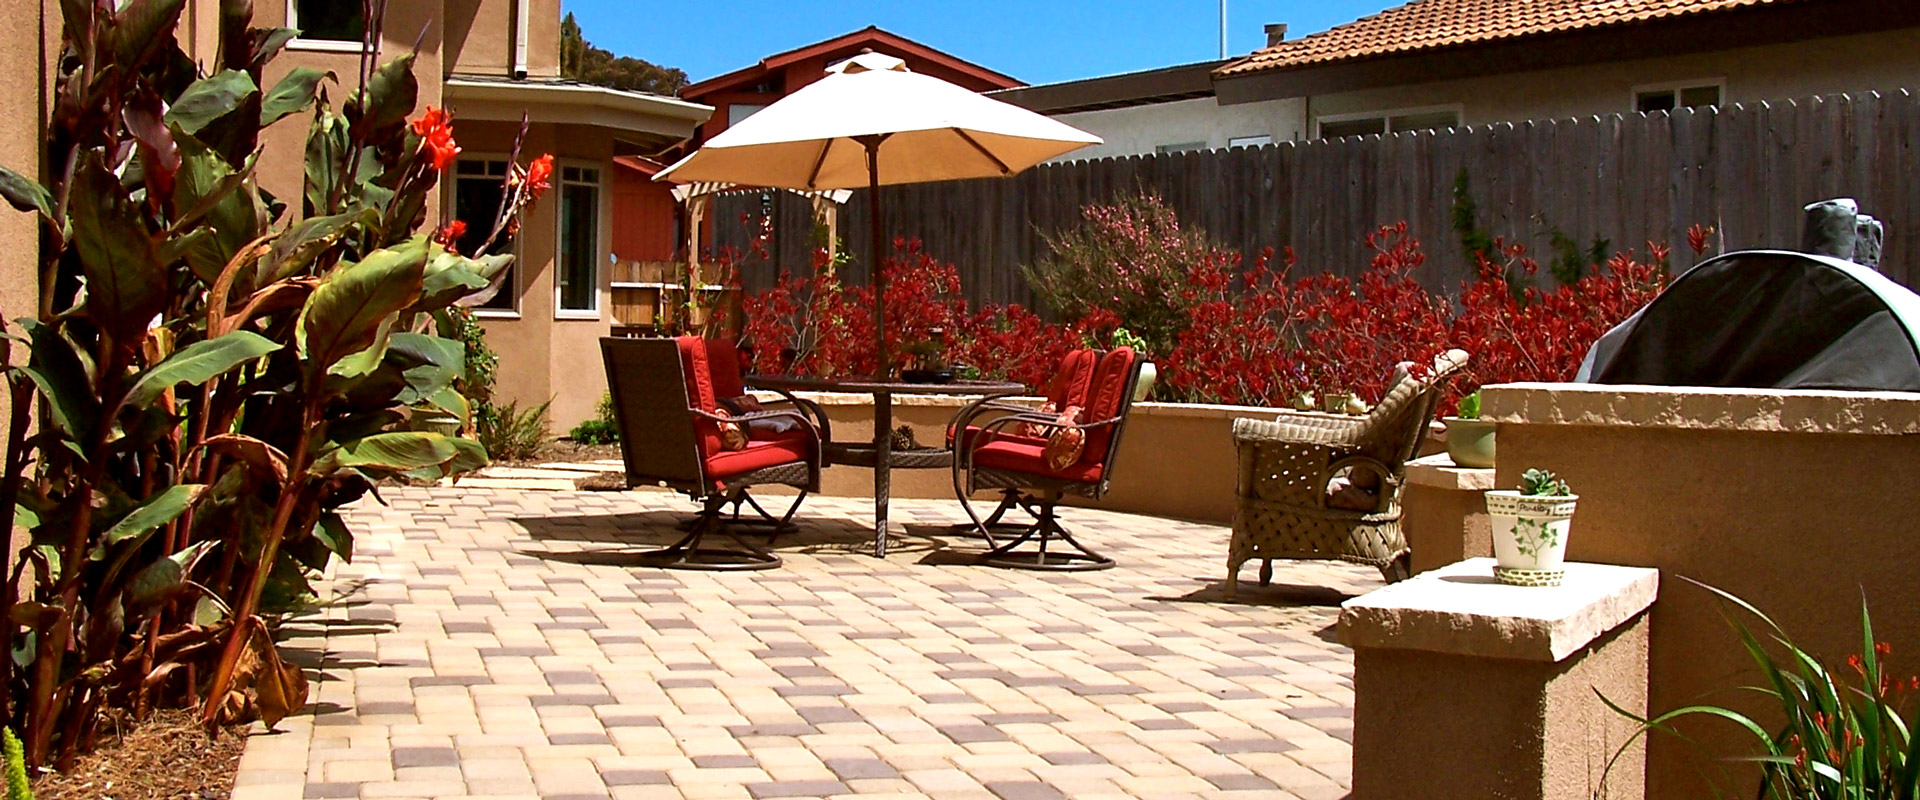 Earthscapes Landscaping Services Patio